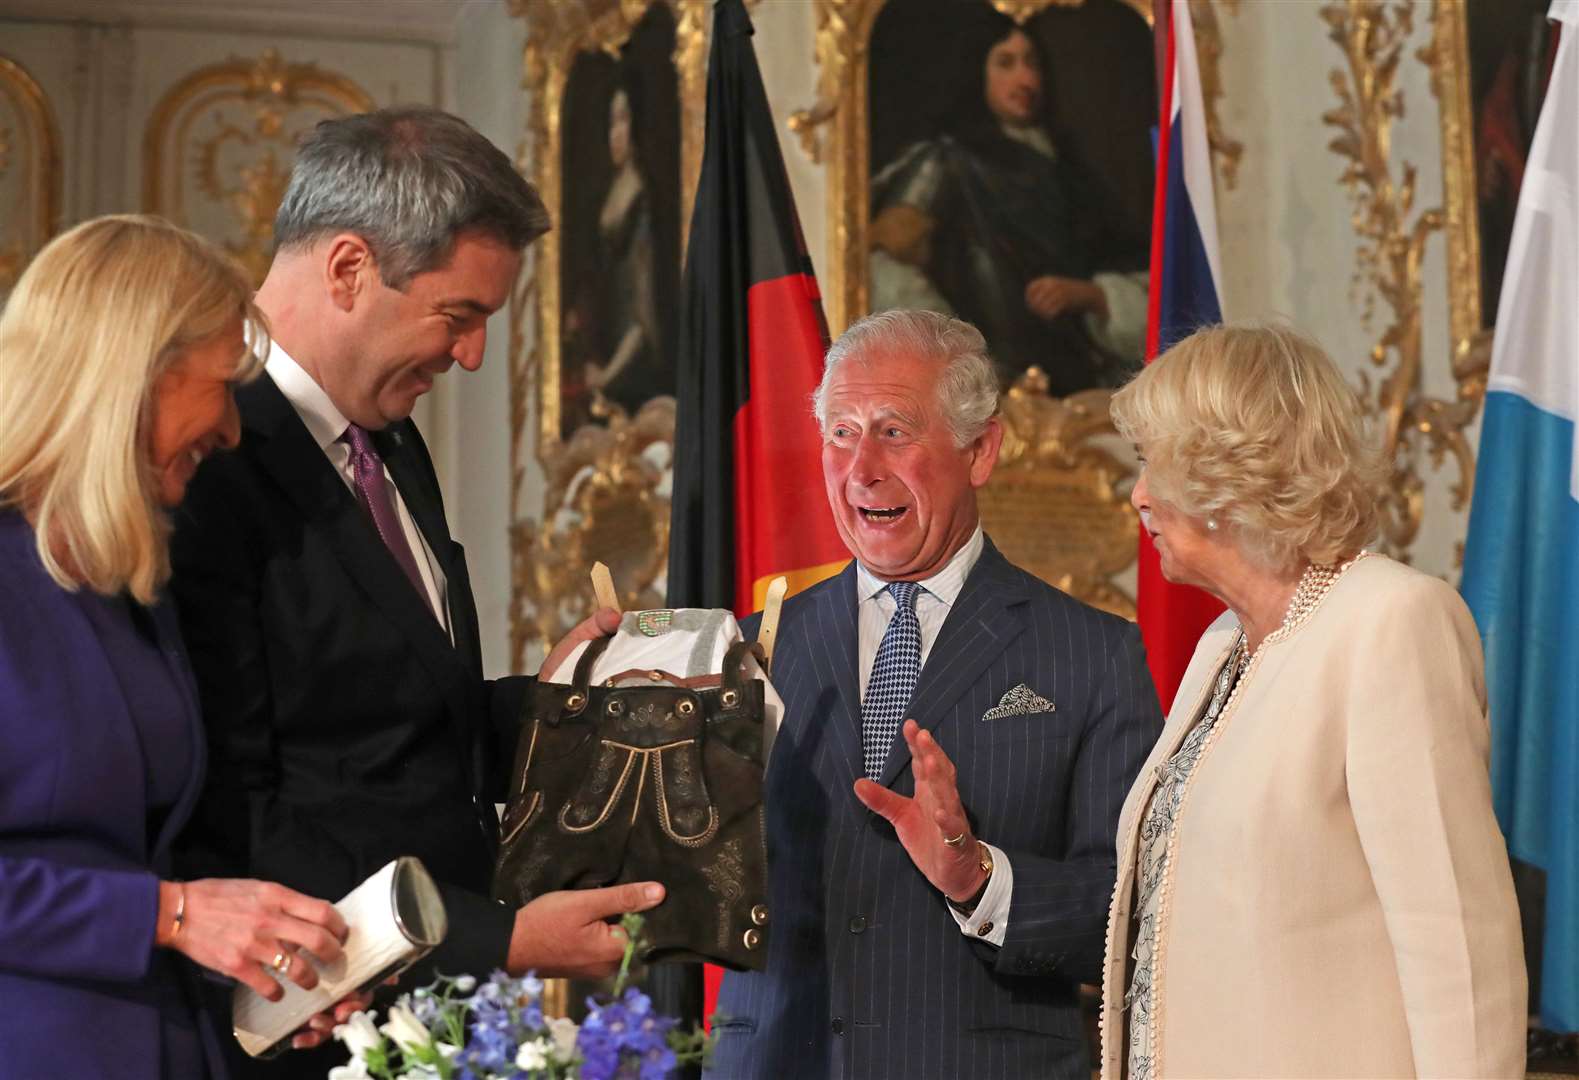 Chalres and Camilla receiving a pair of baby lederhosen for Archie from the Minister-President of Bavaria Markus Soder (Steve Parsons/PA)